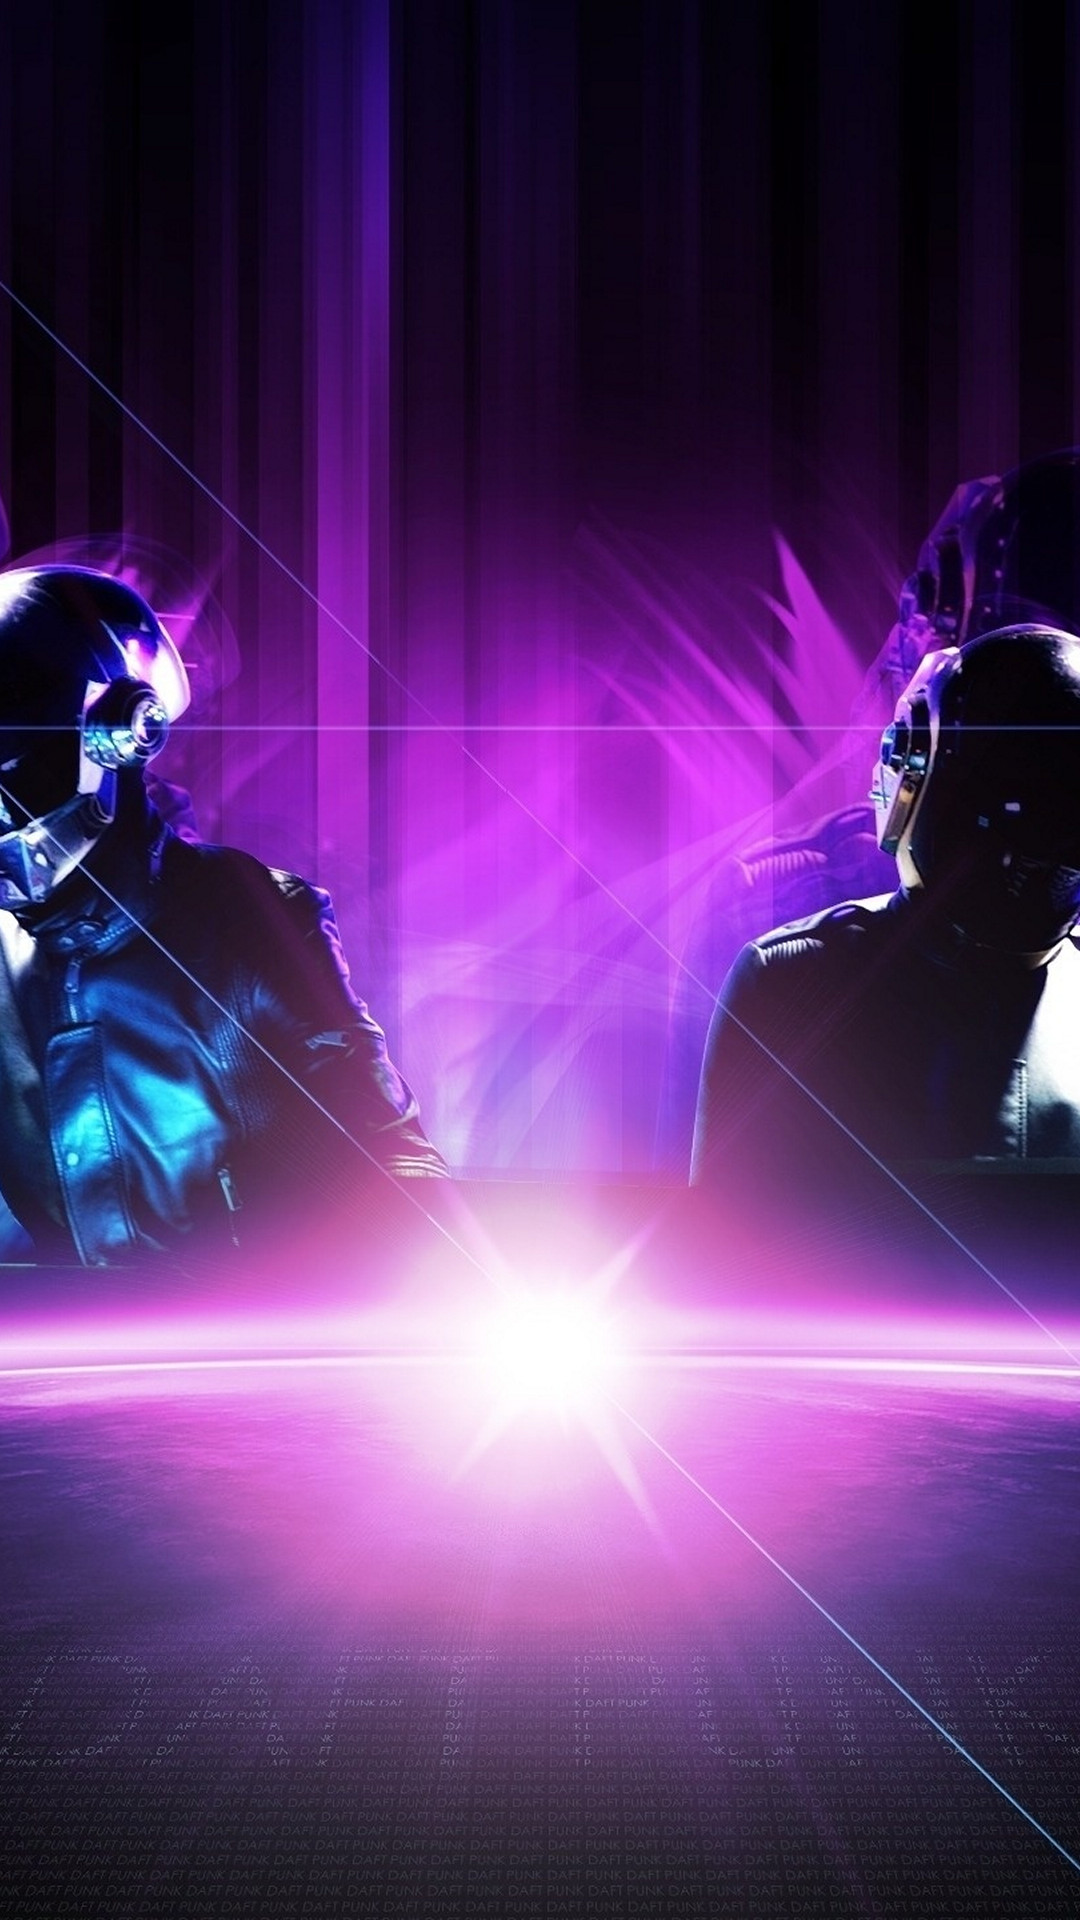 1080x1920 Wallpaper for galaxy s4 with daft punk with purple tone in   resolution